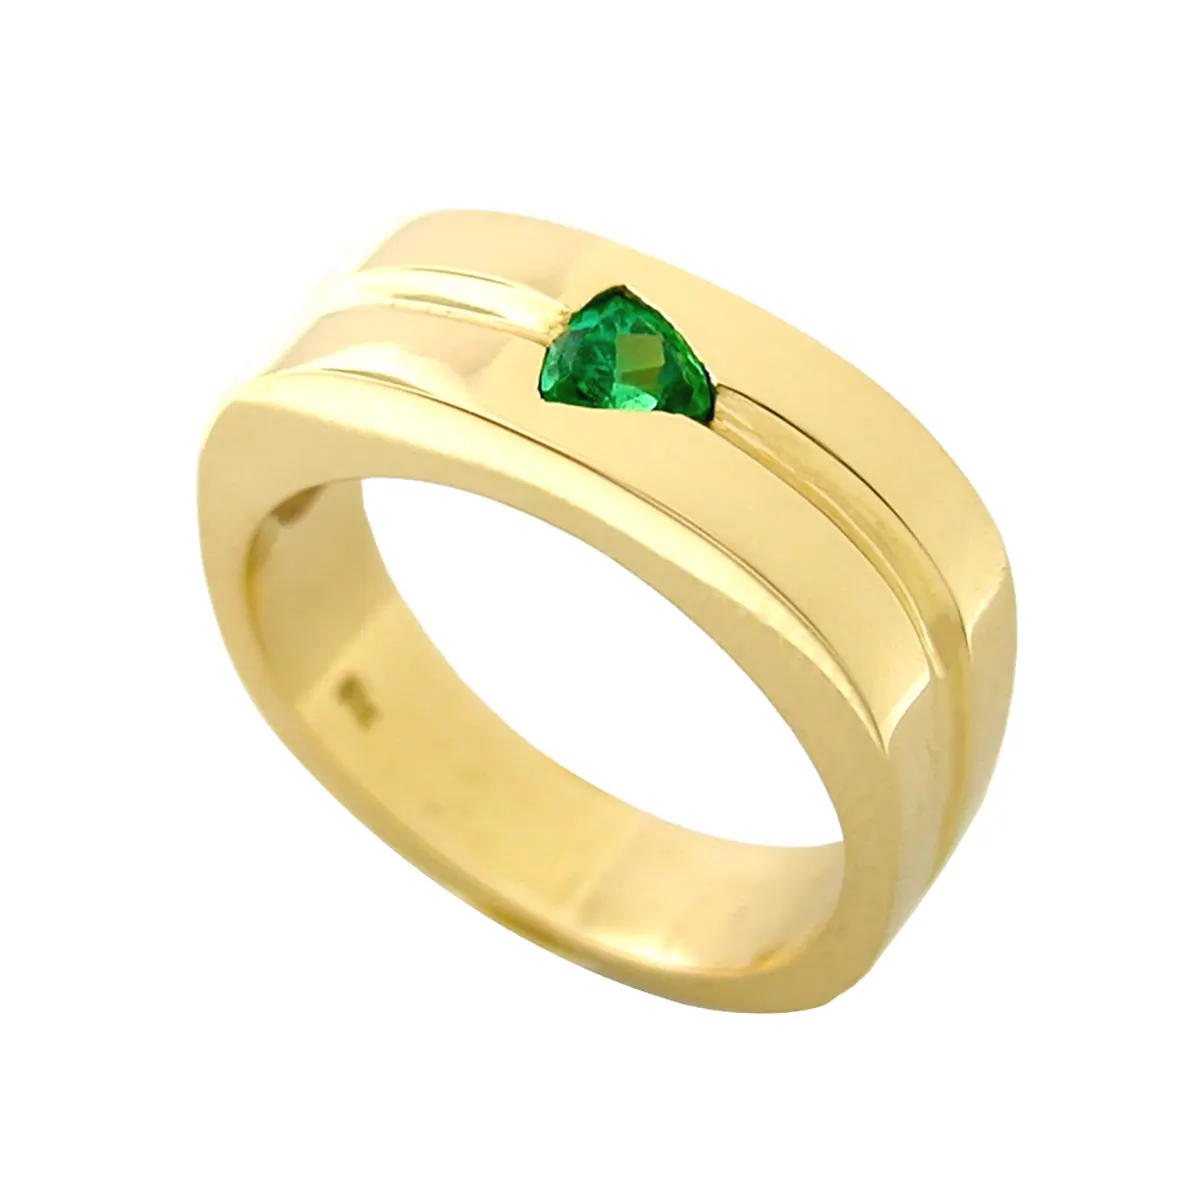 18K Yellow Gold Band With Triangle Cut Emerald